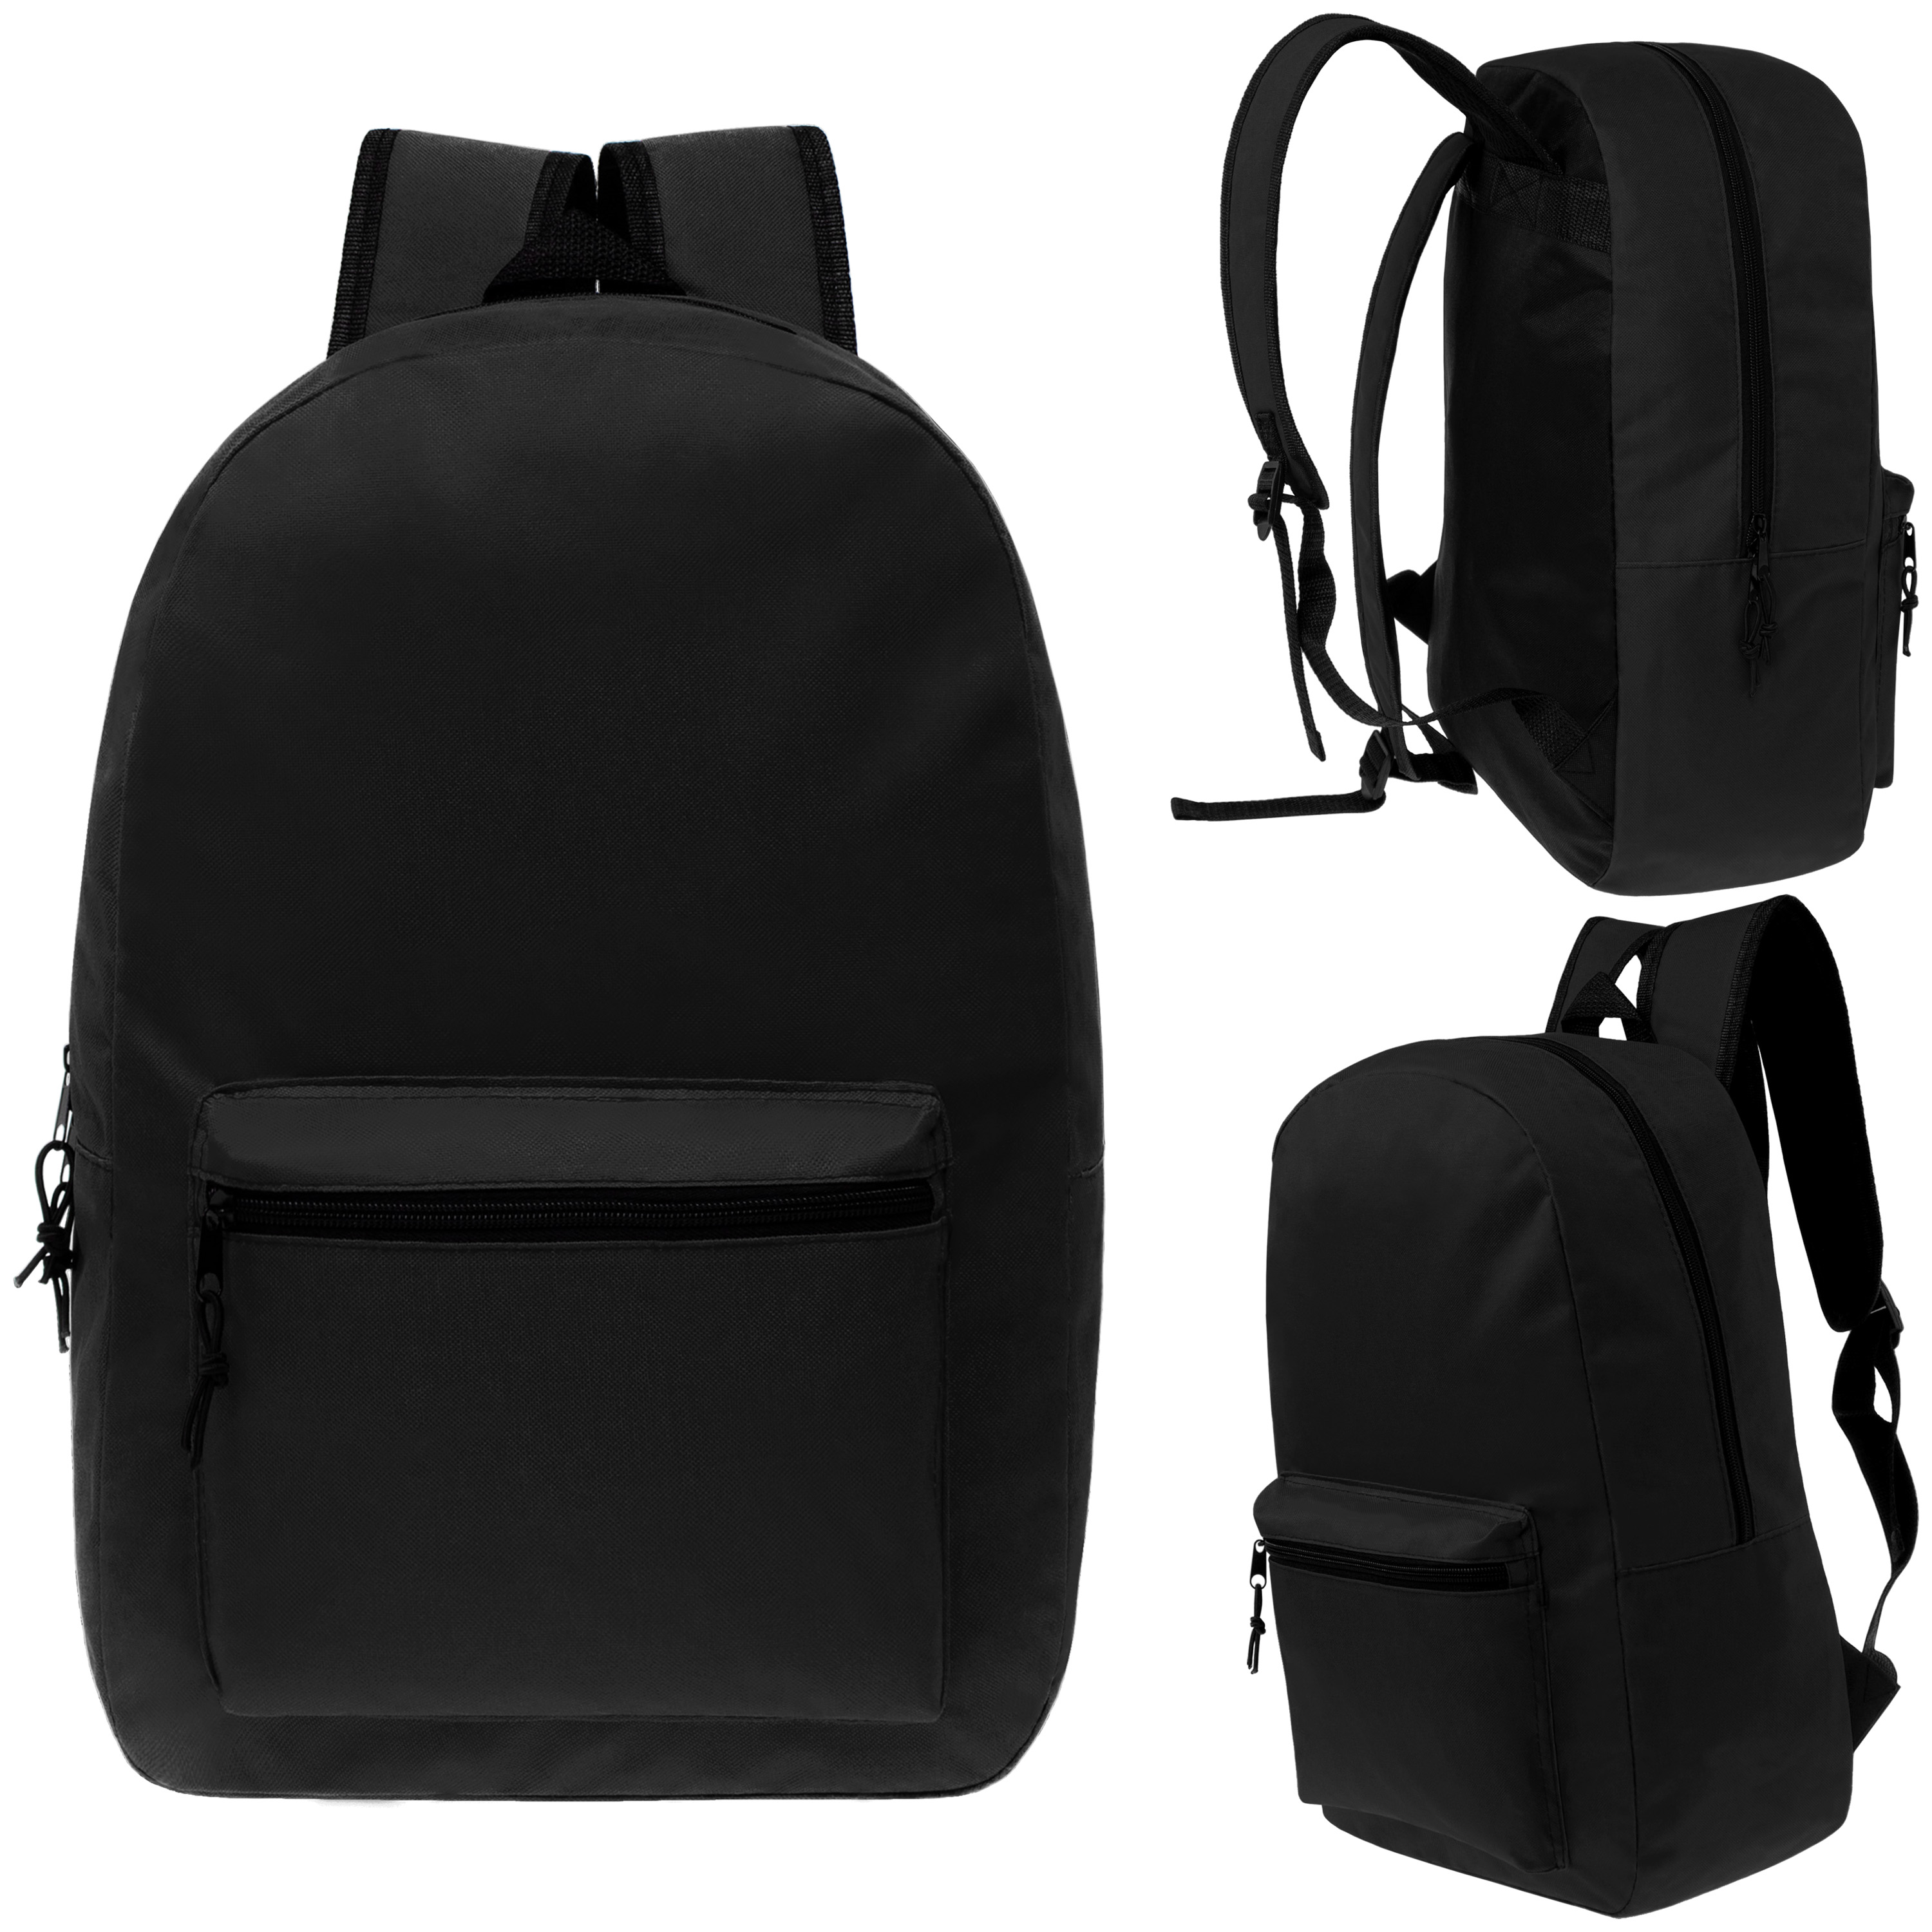 ''15'''' Lightweight Classic Style BACKPACKs w/ Adjustable Padded Straps - Black''